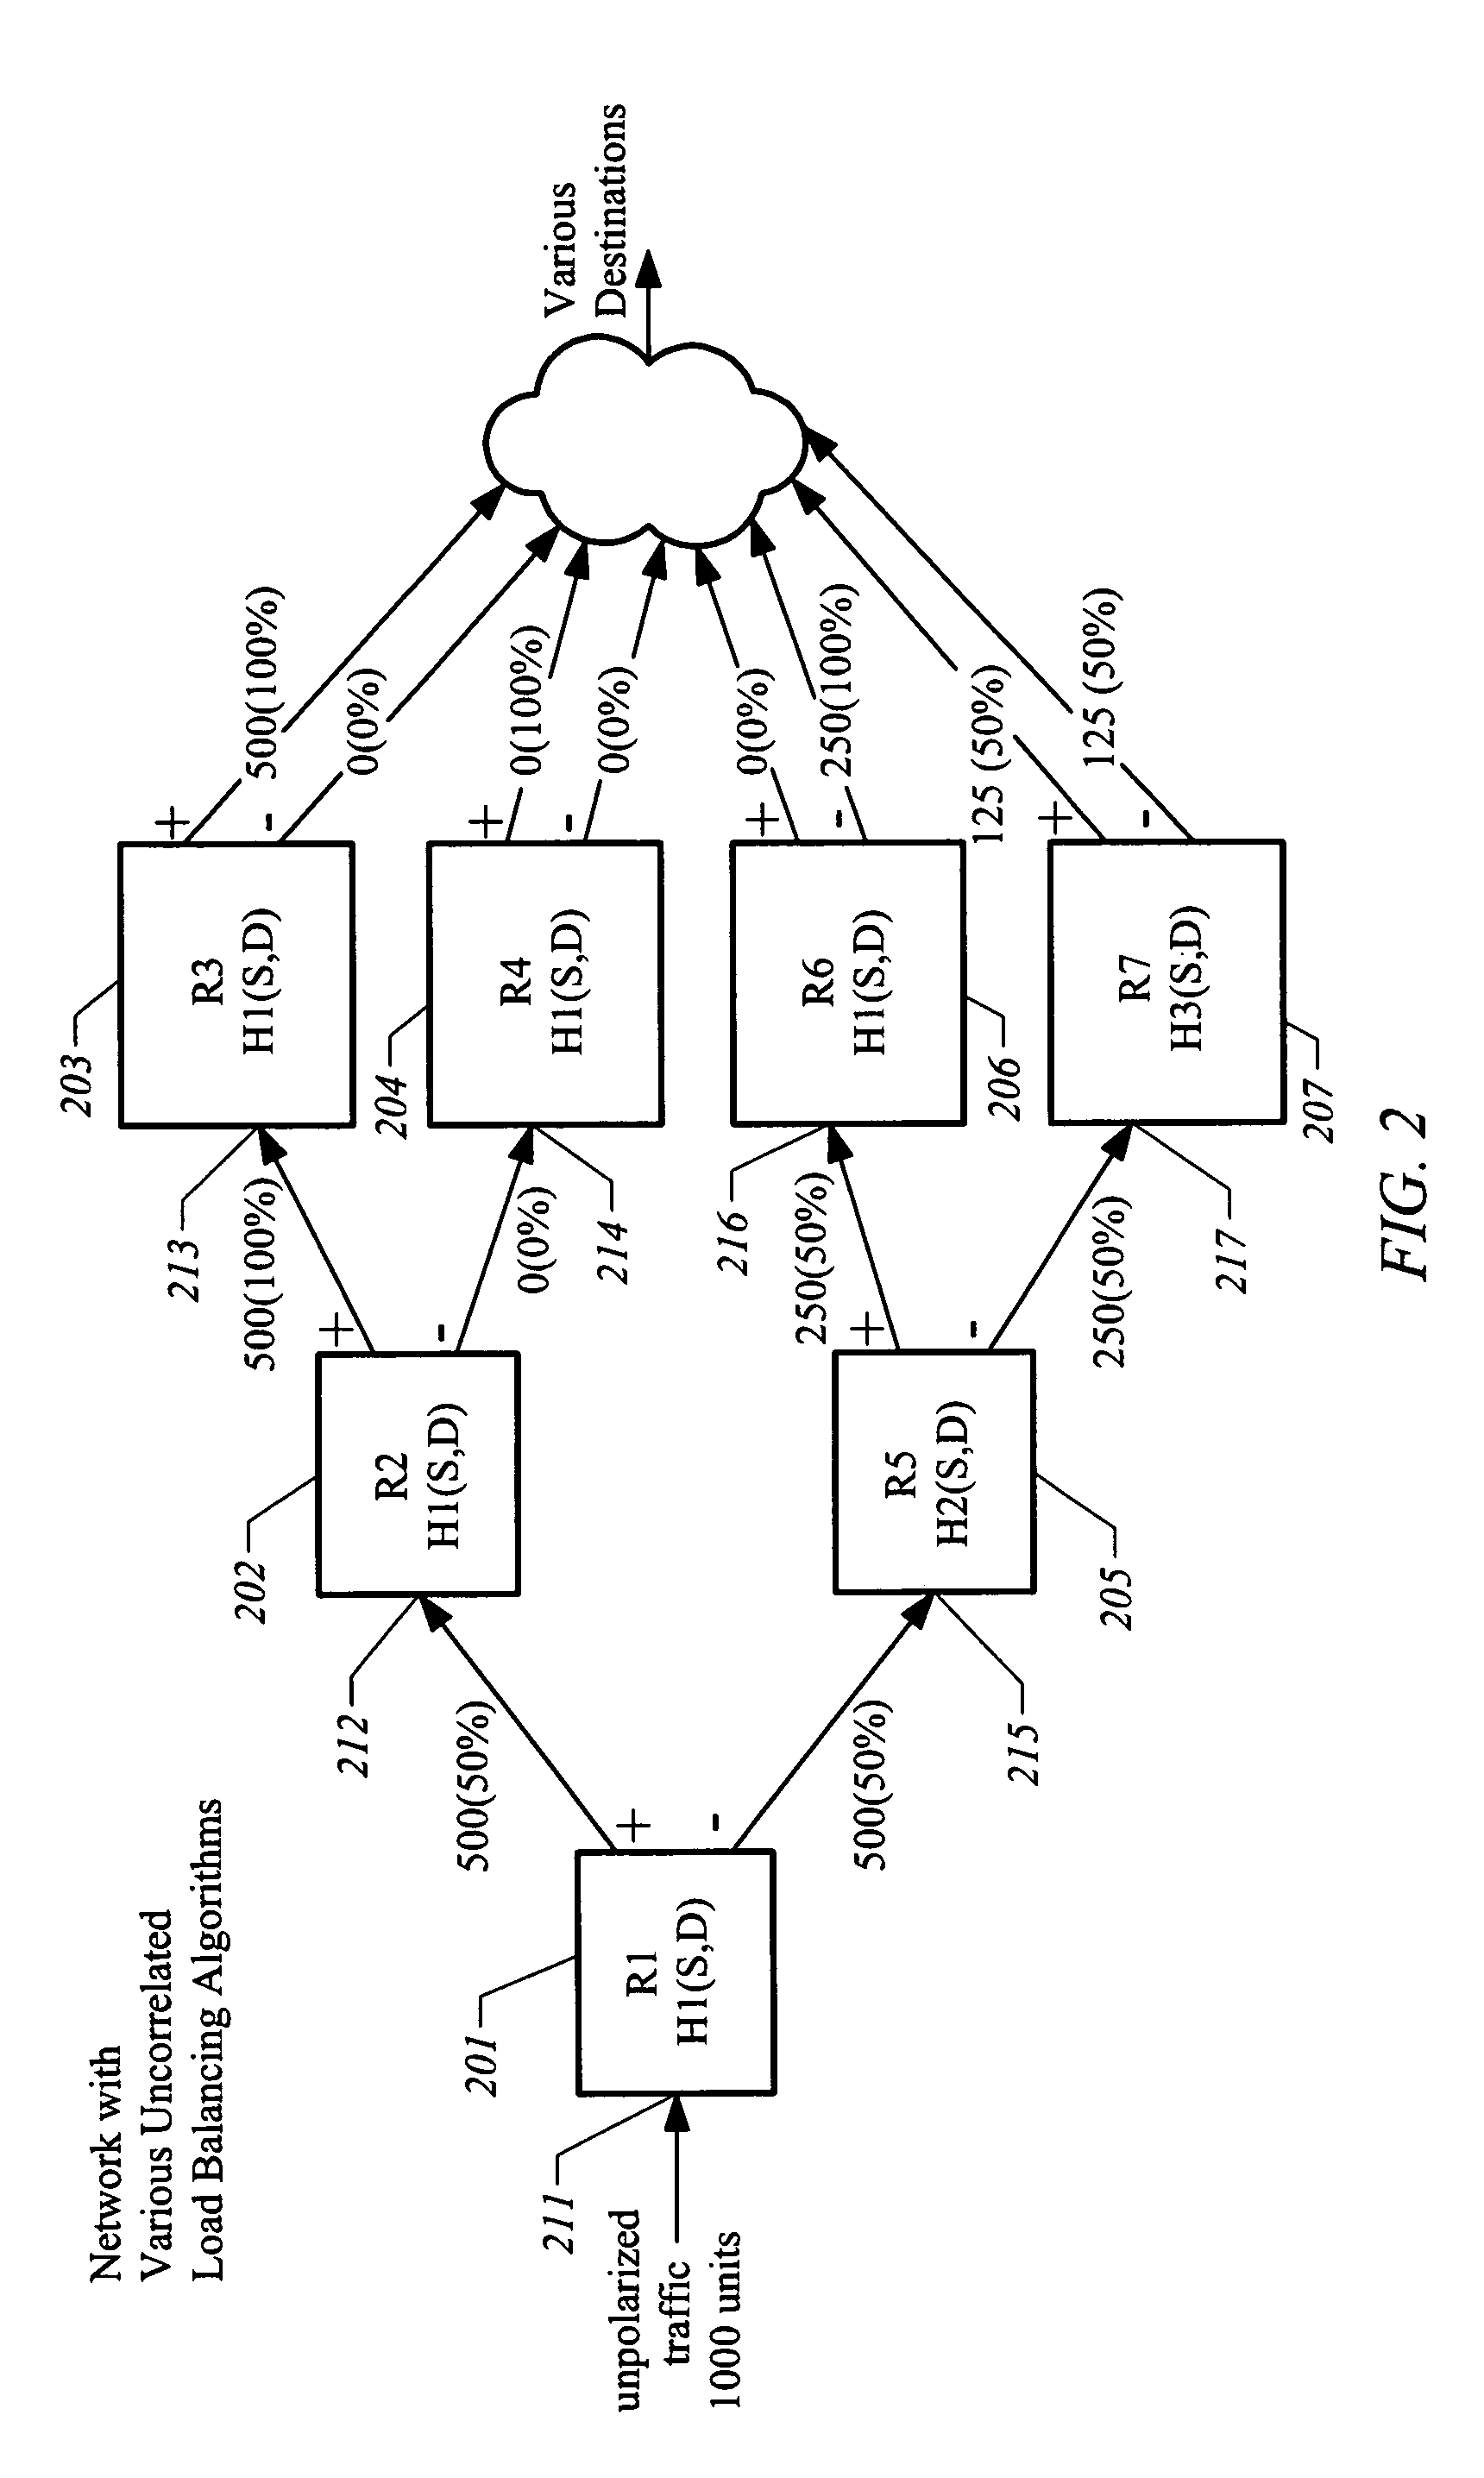 Method and apparatus for per session load balancing with improved load sharing in a packet switched network